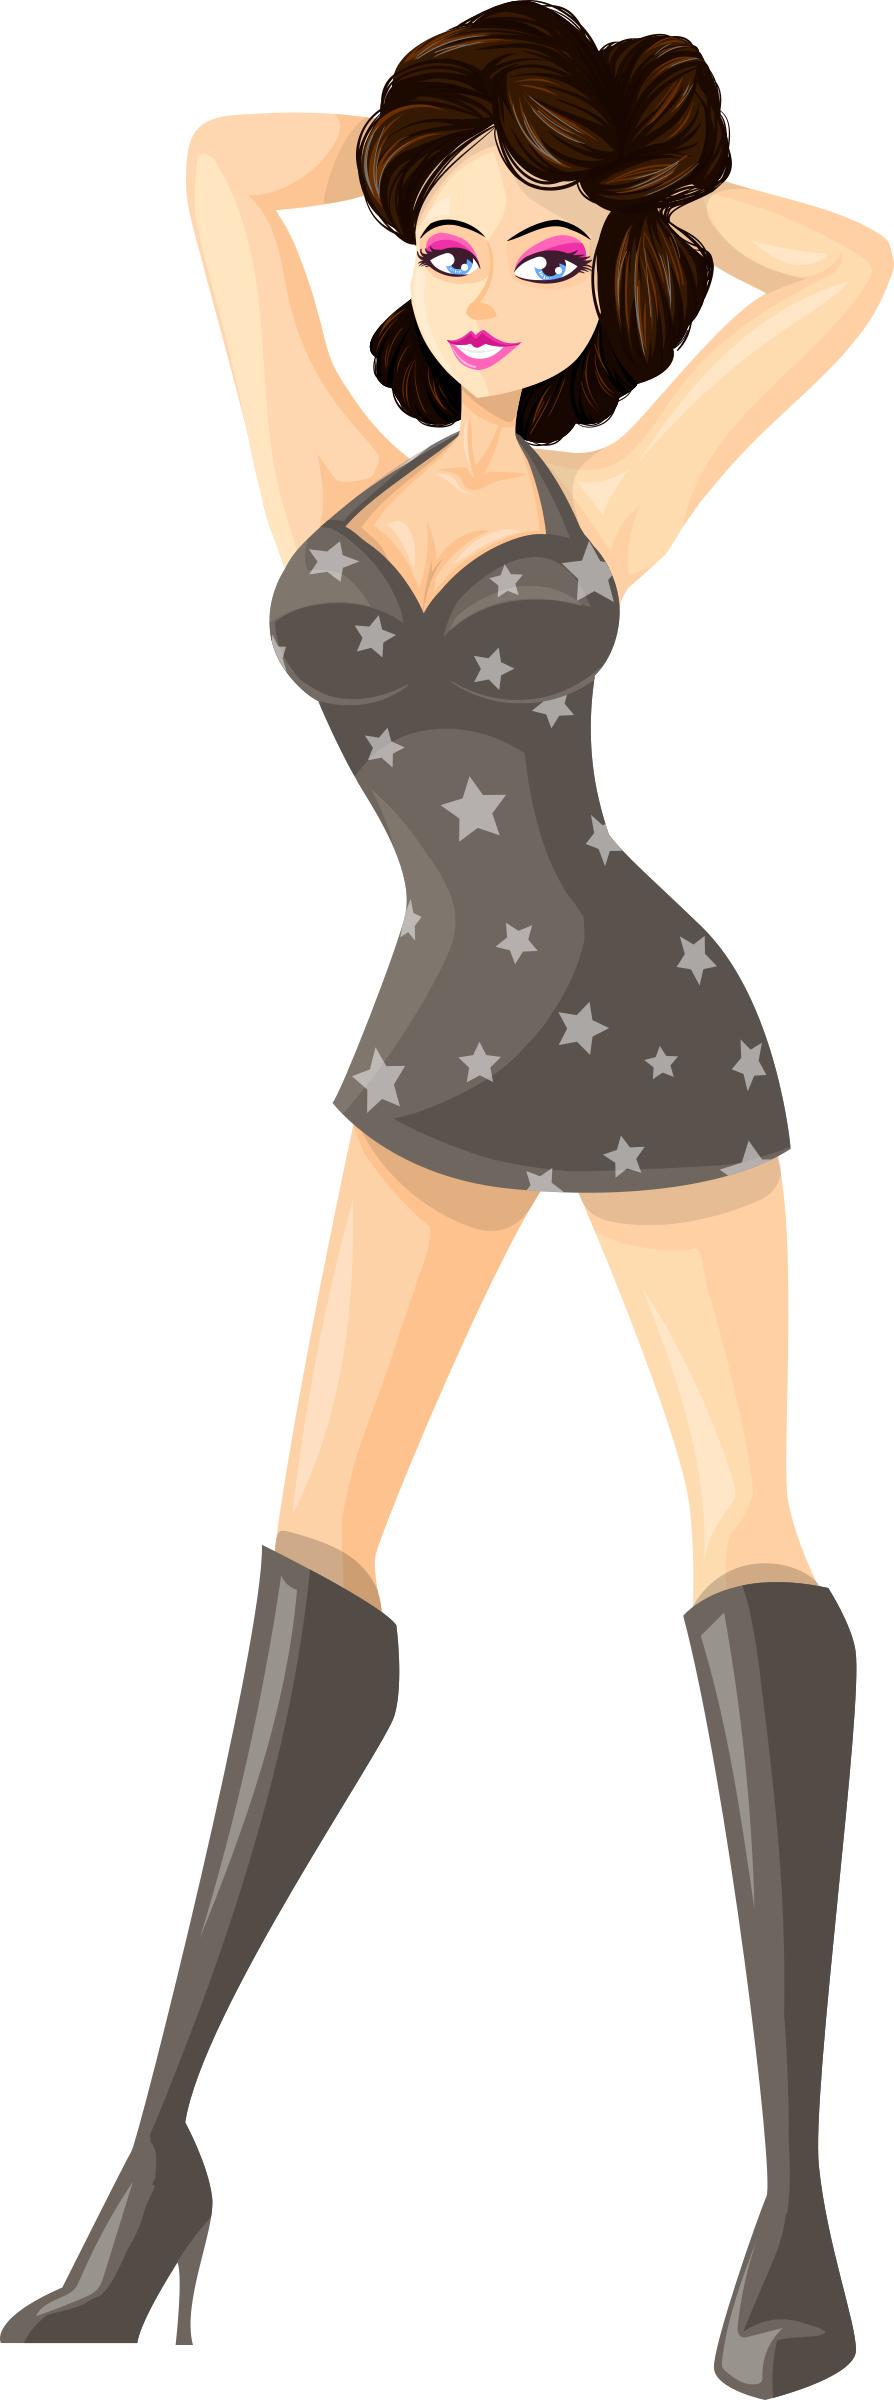 Young lady 2 (brown hair, light skin, starry dress #1) PNG icons